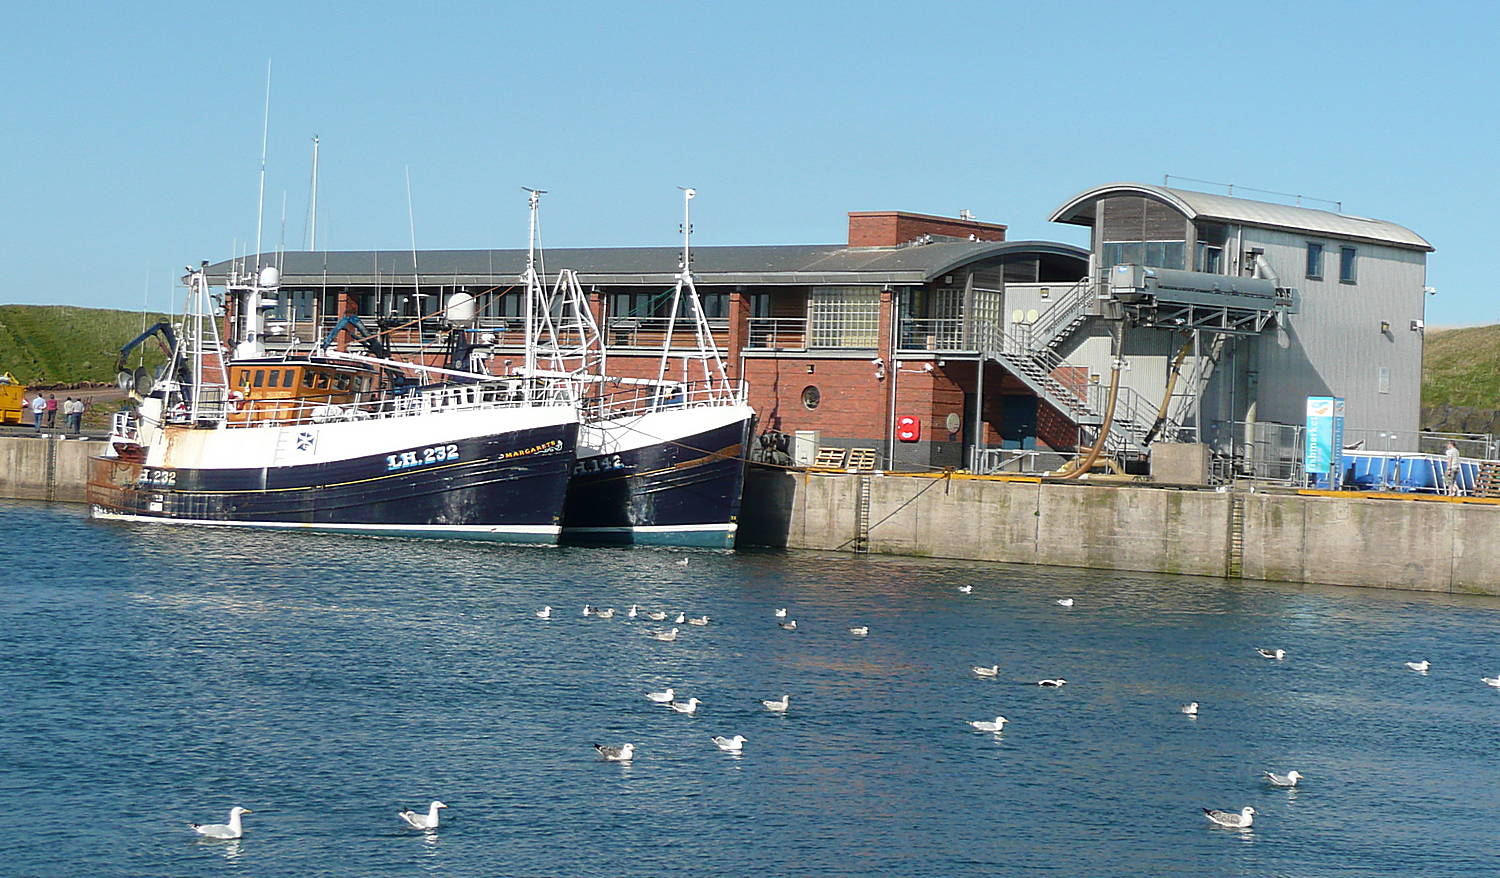 Trawlers in Eyemouth Harbour